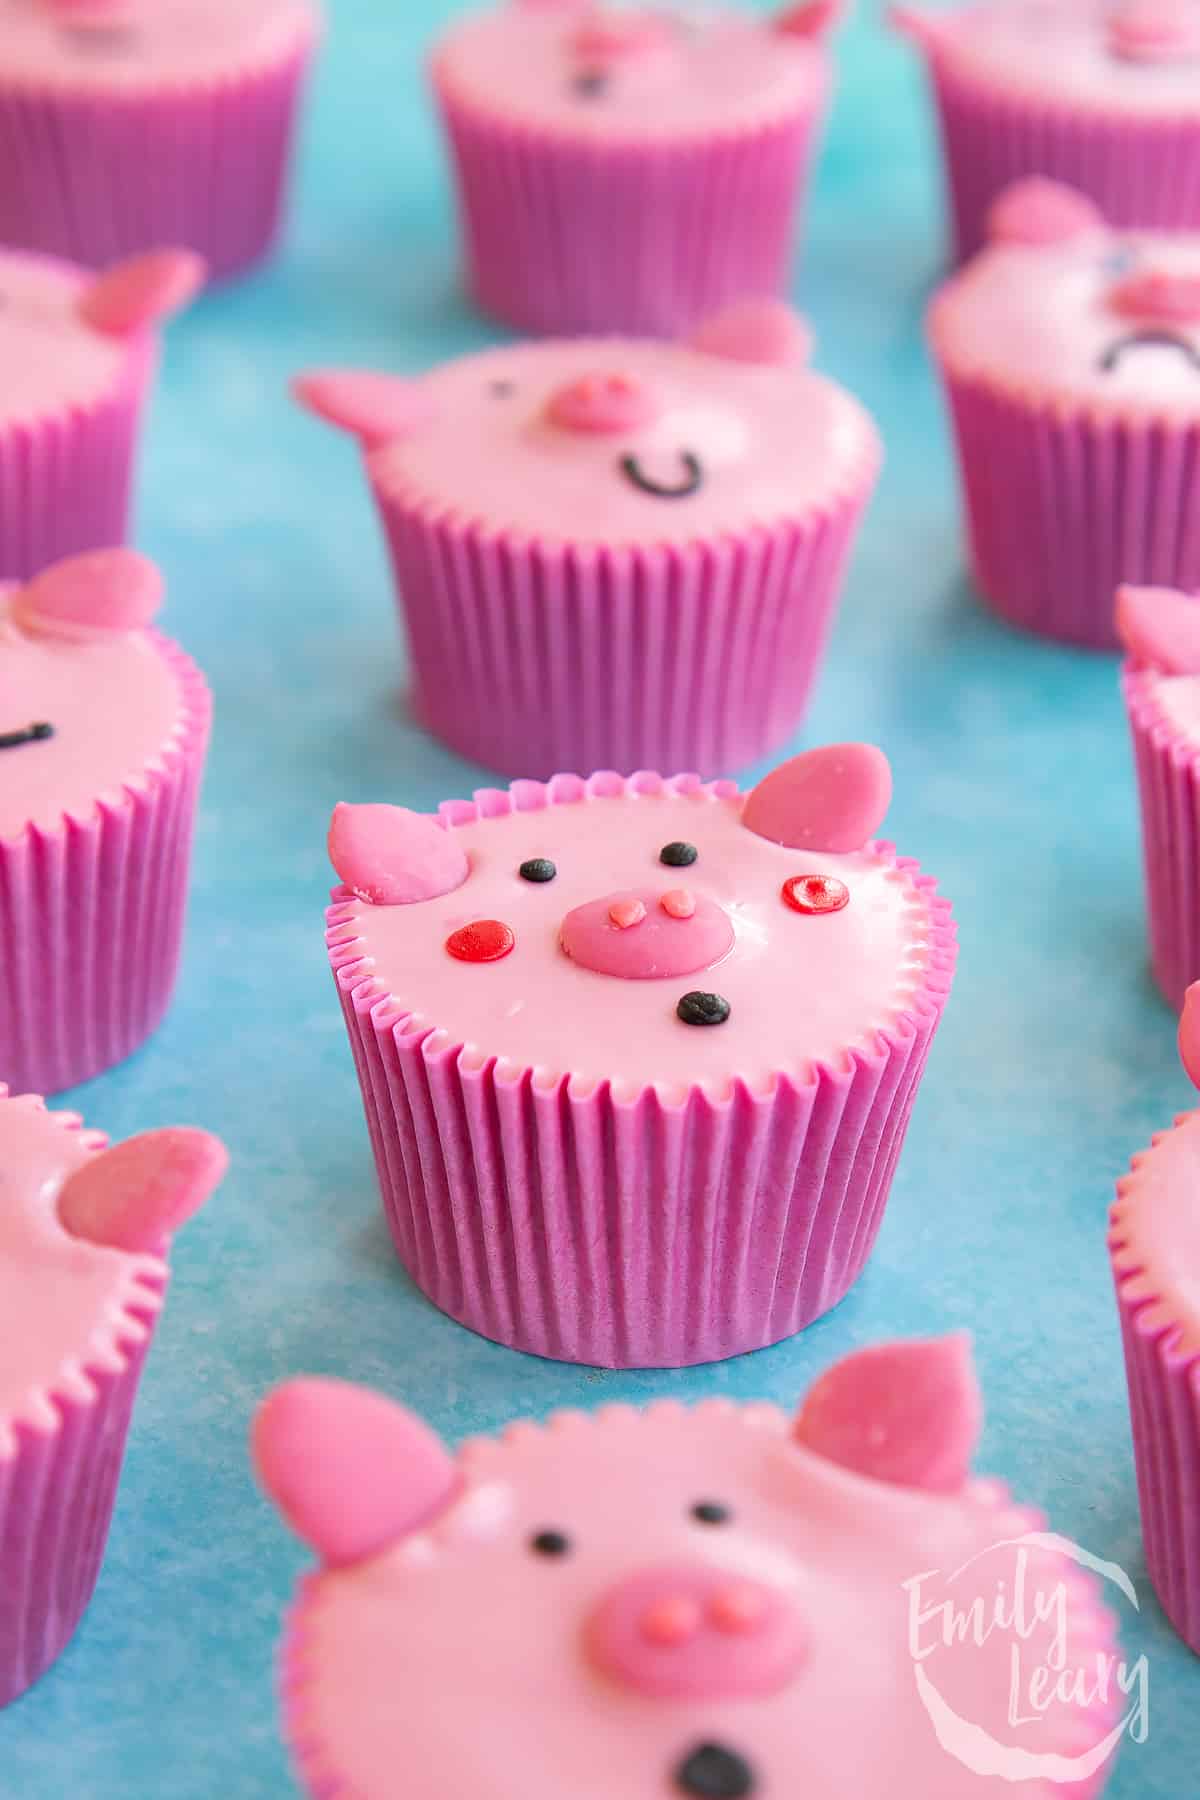 Pink pig cupcakes in rows portraying different faces.